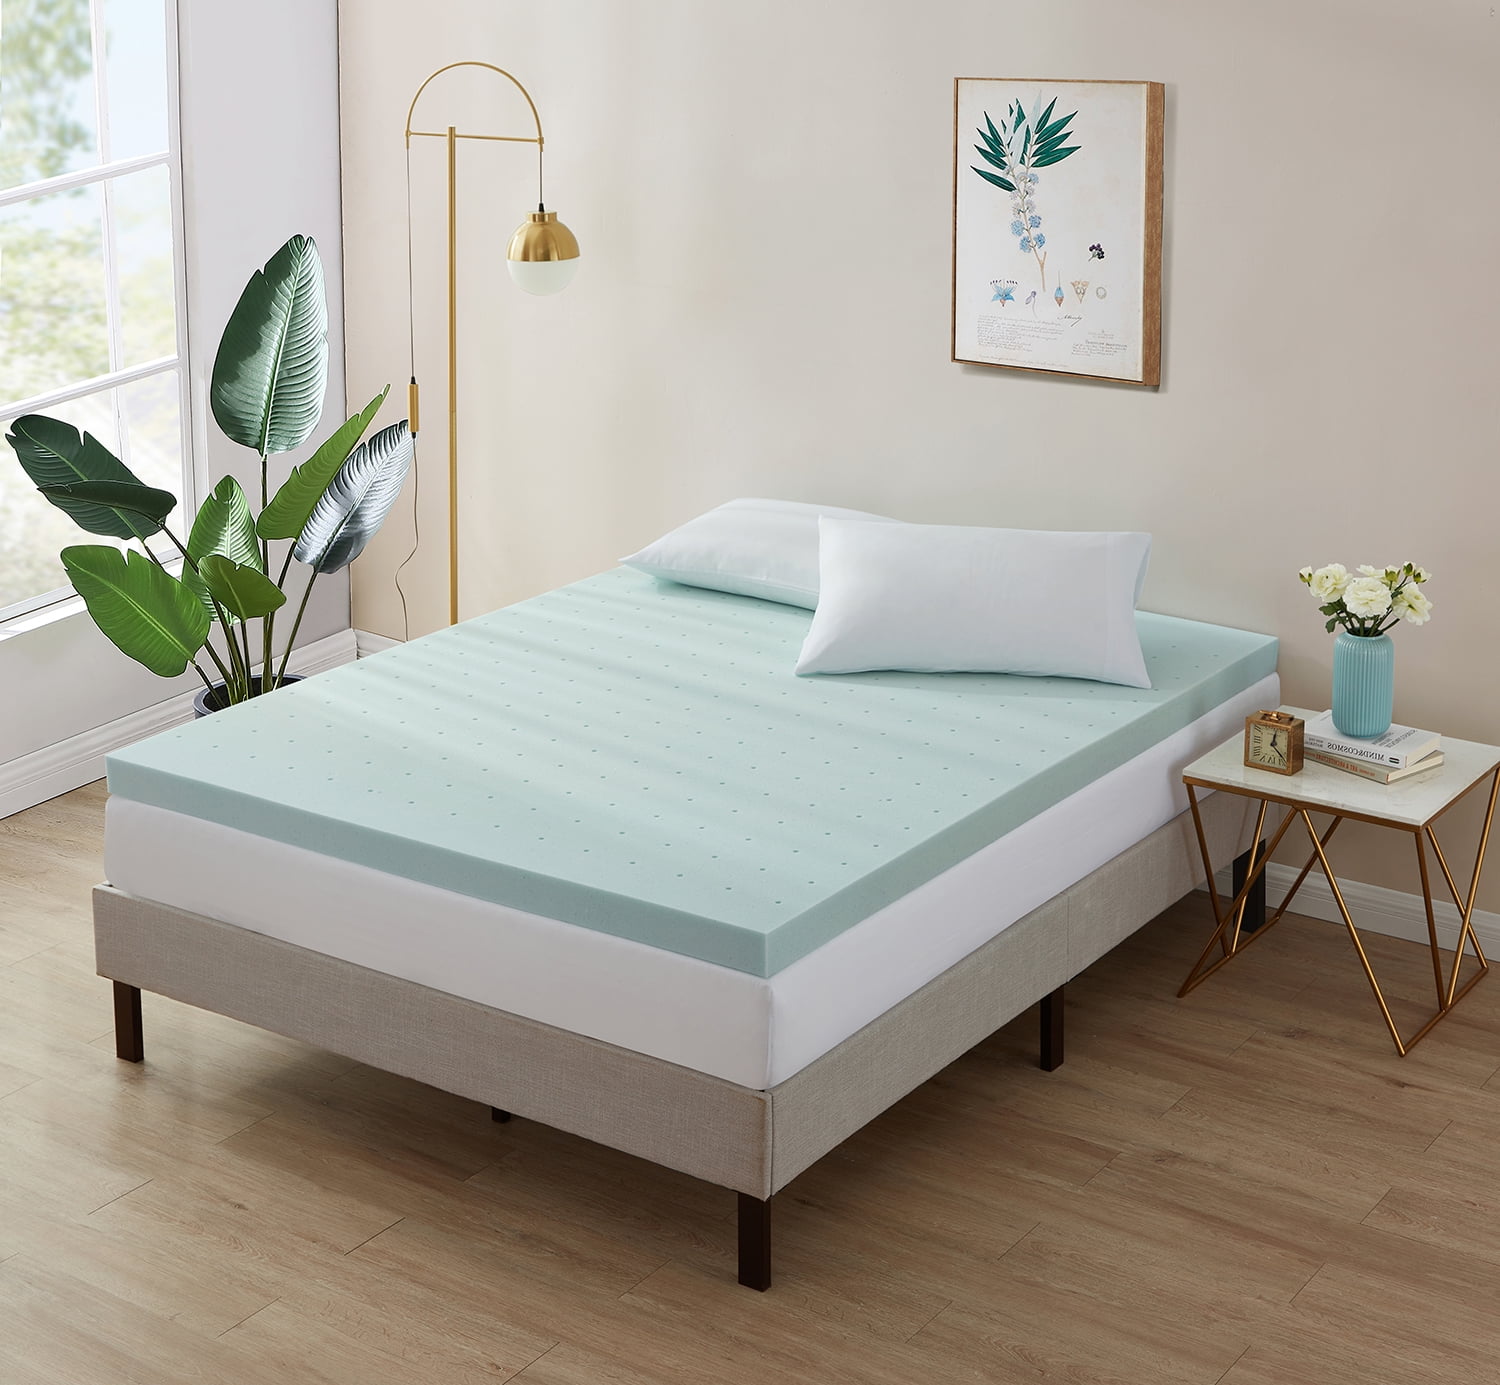 Mattress Topper Gel Memory Foam 2" Orthopedic Pad Bed Cover Firm-Full Queen King 